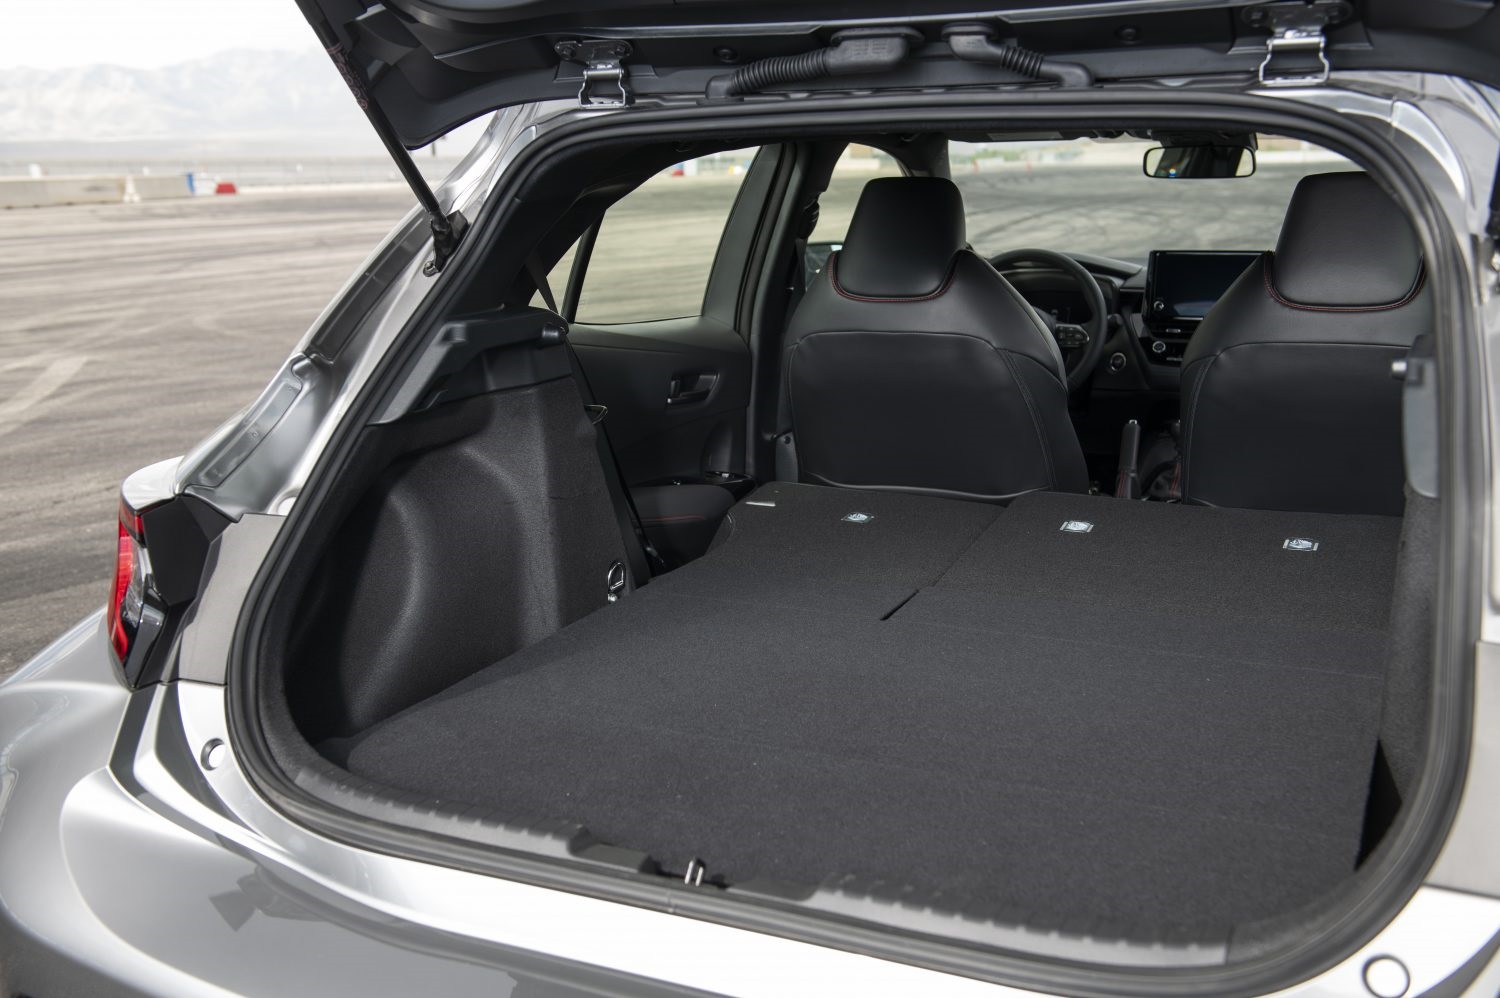 The open cargo door shows plenty of space for groceries and track gear